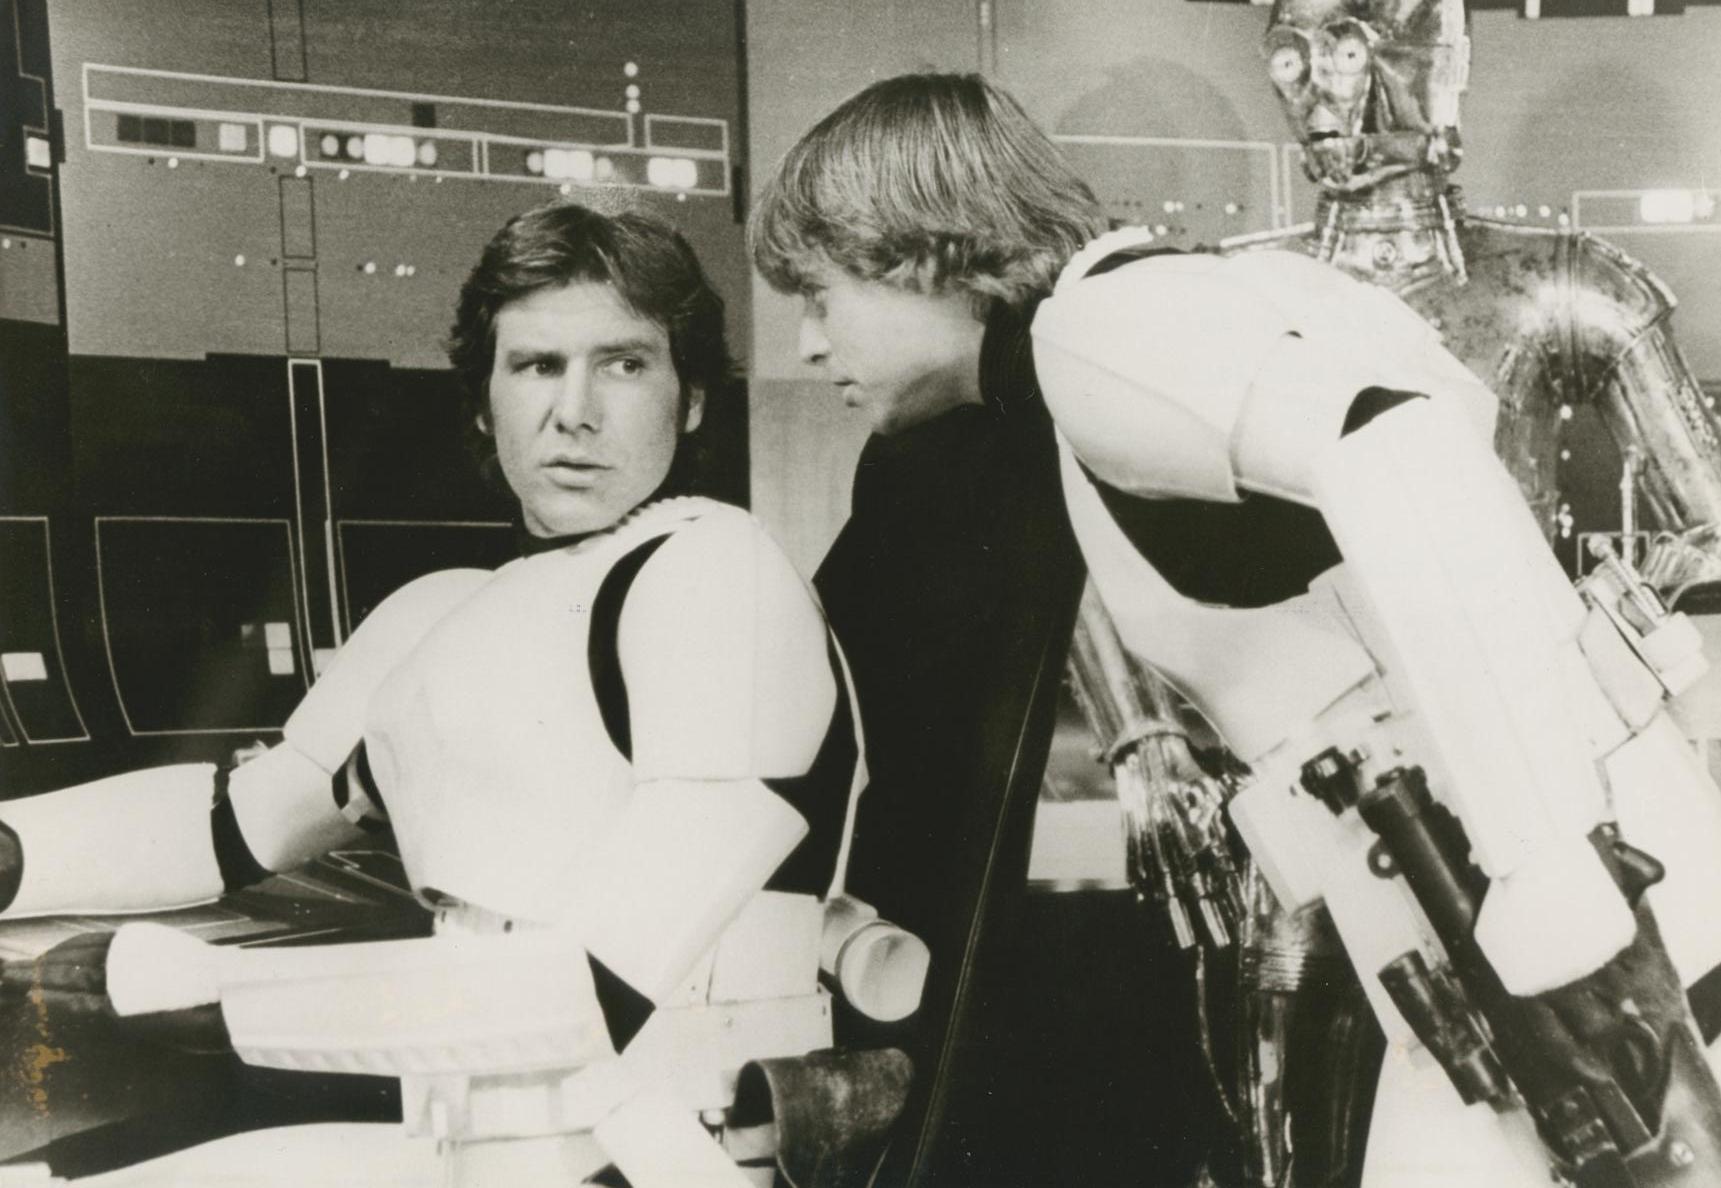 Unknown Black and White Photograph – Star Wars, Sience Fiction Filmstill, 1977